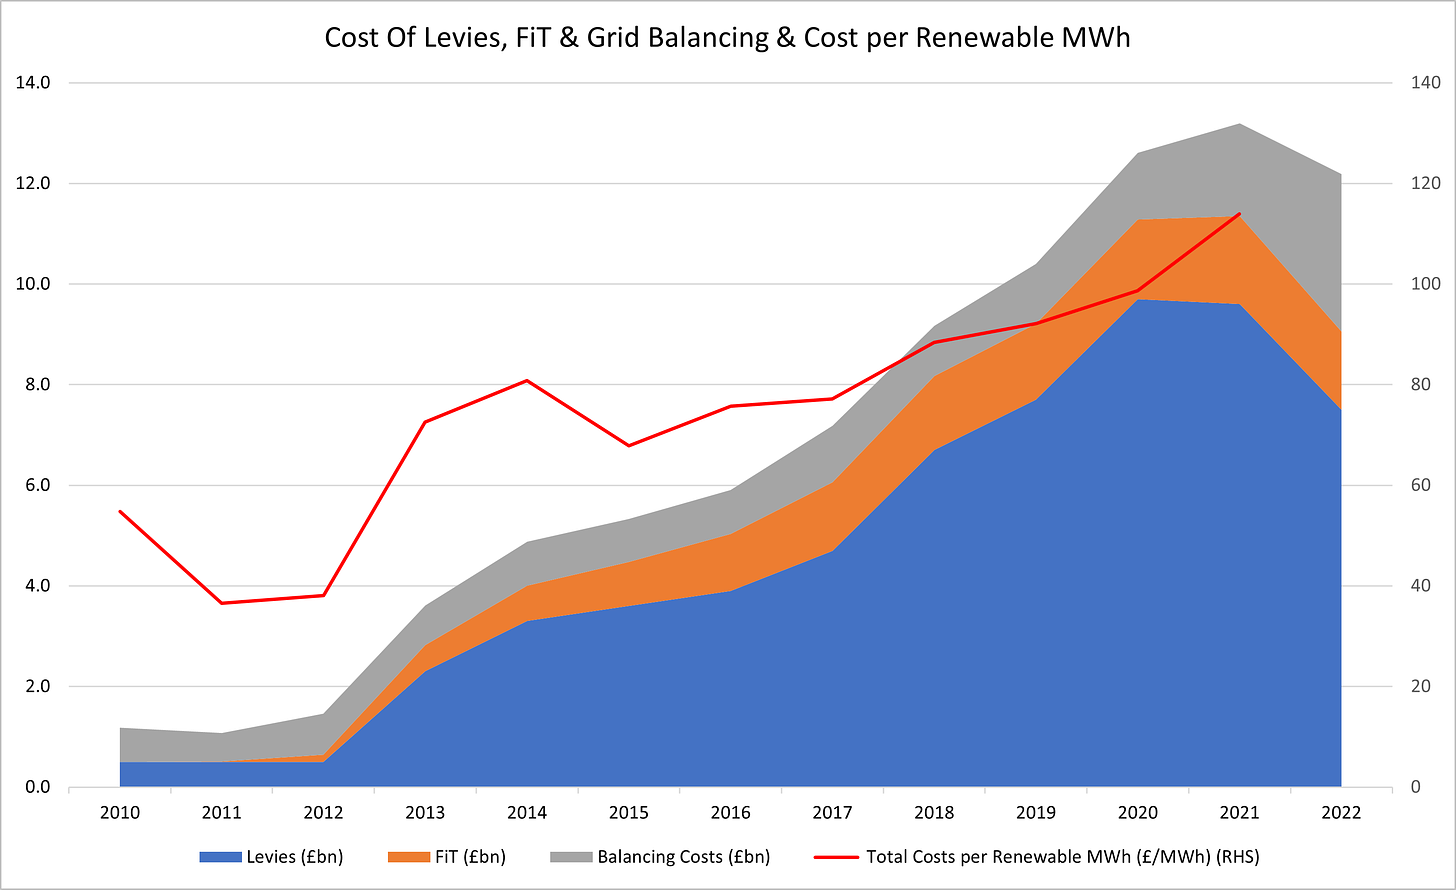 Hidden Costs of Renewables: and Net Zero: Costs of Levies FiT and Grid Balancing and Cost per Renewable MWh 2010-2022